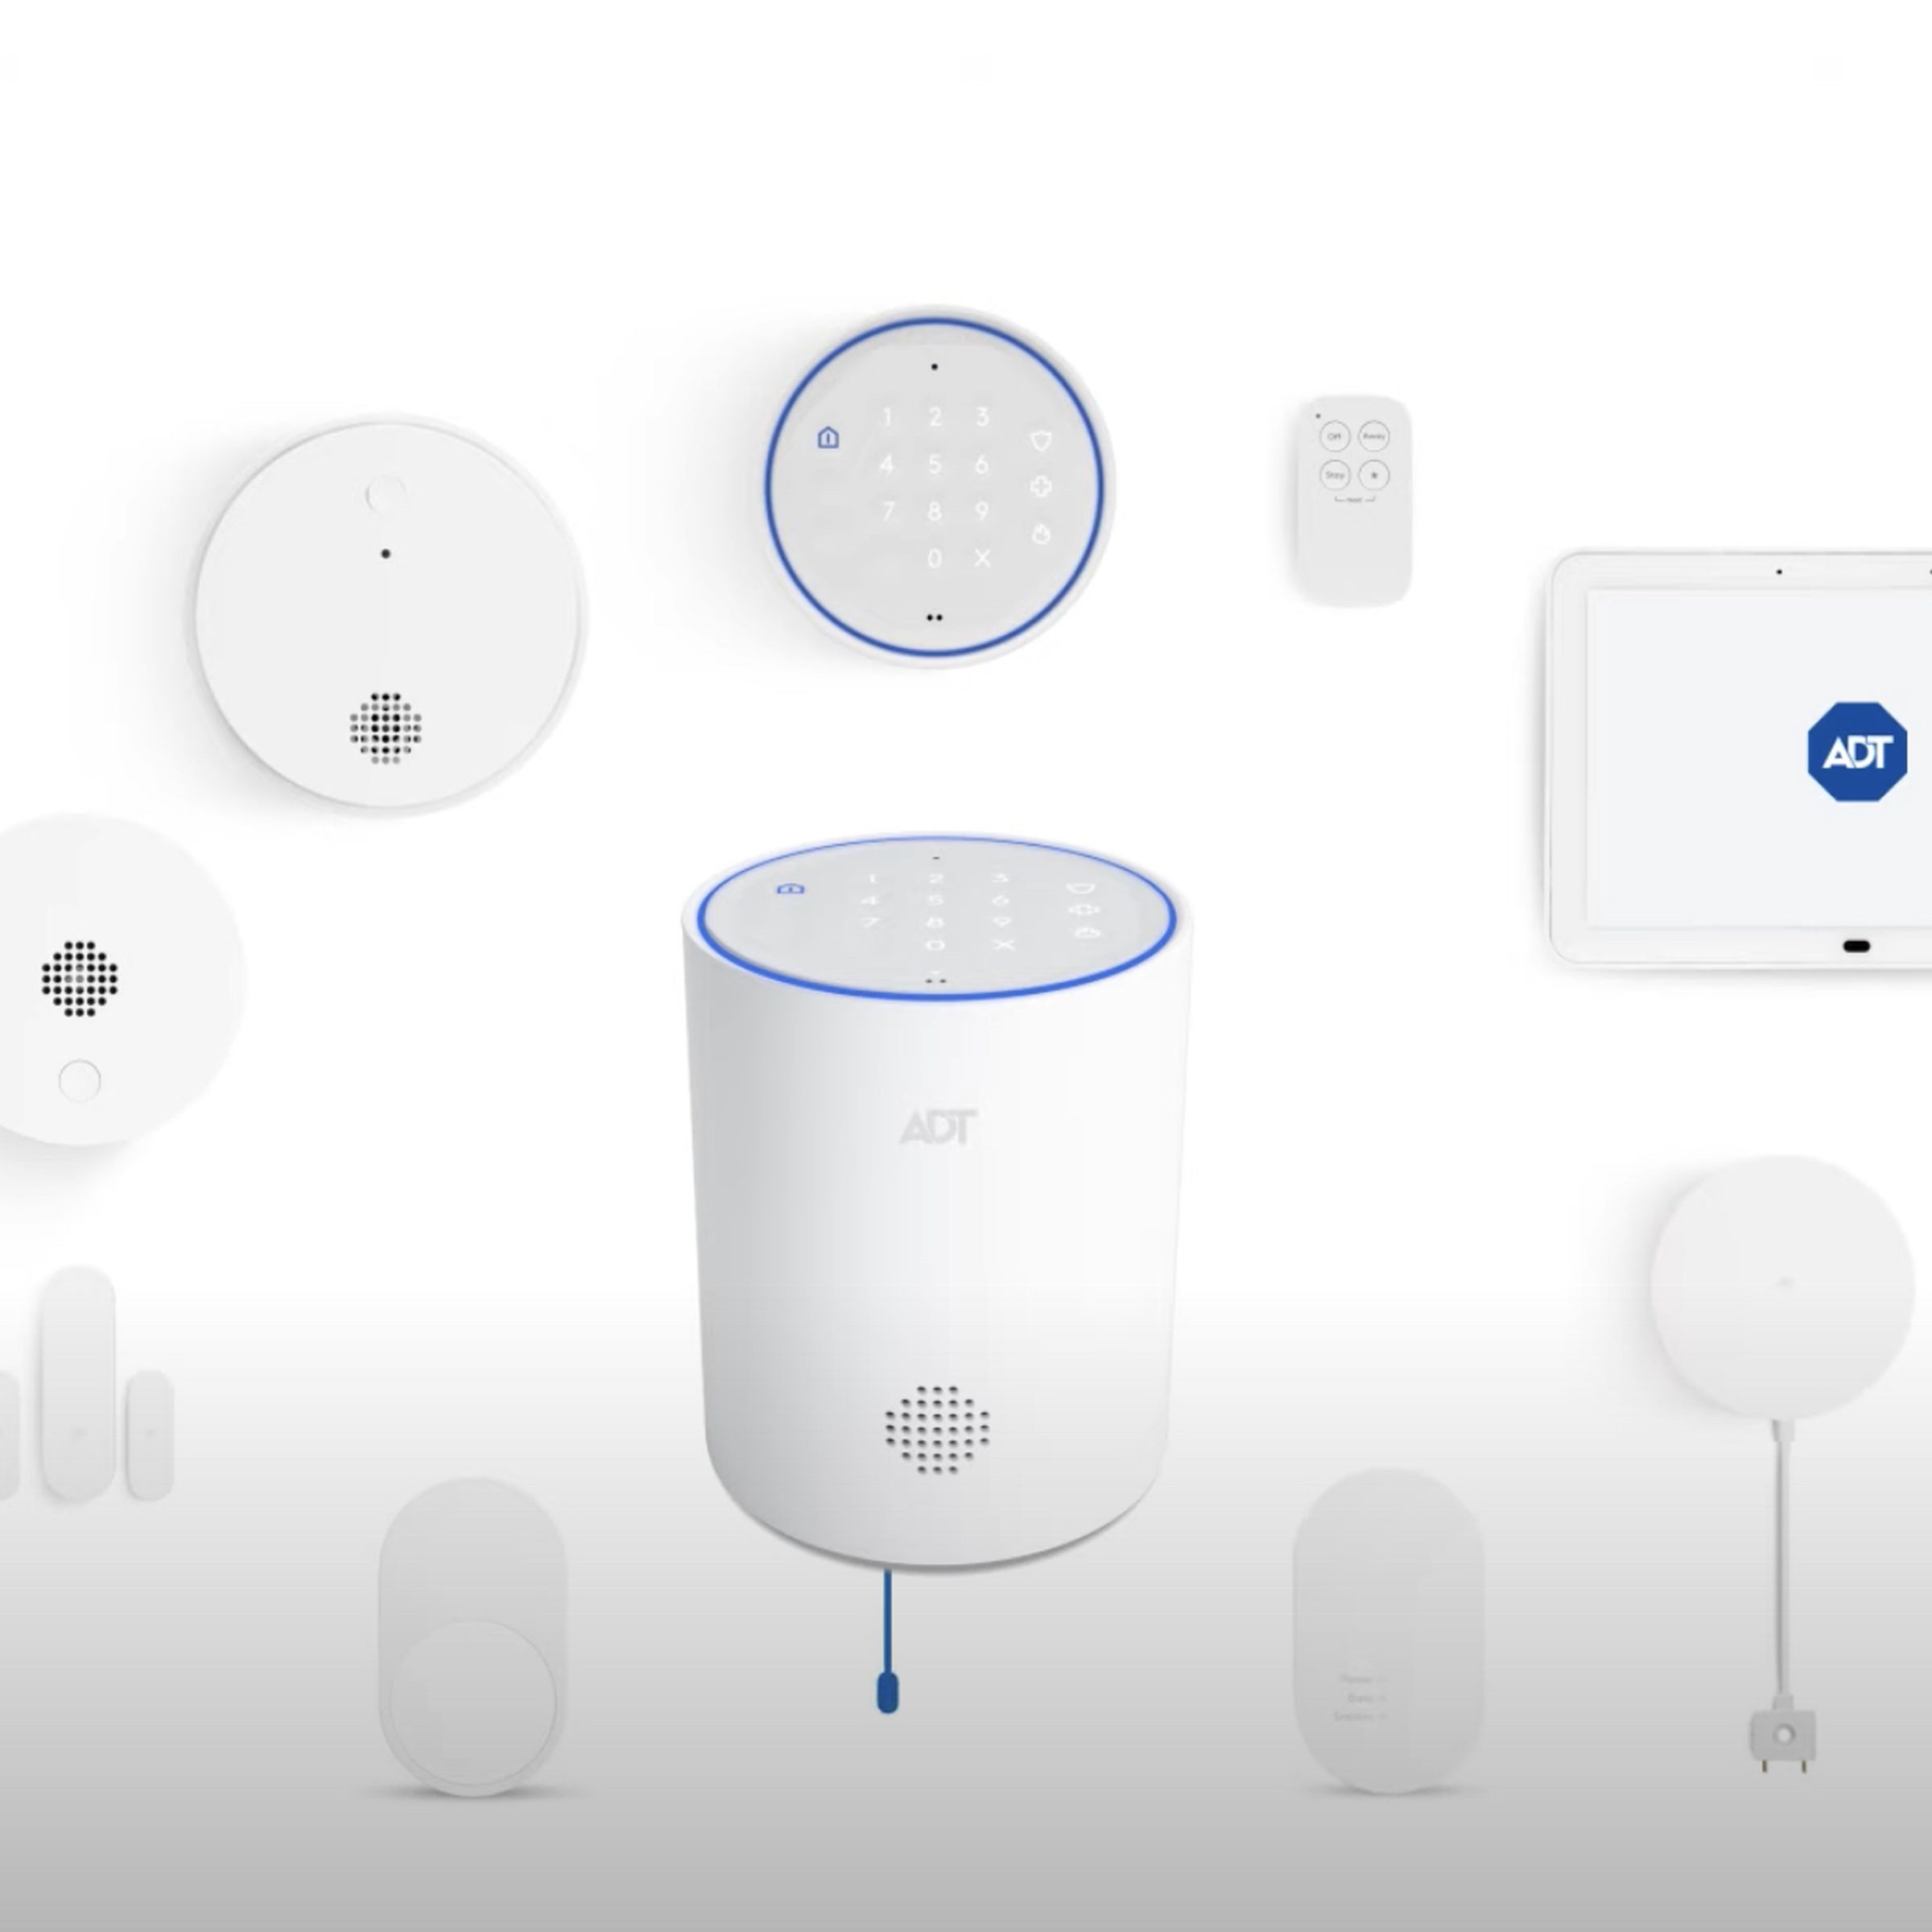 ADT has a new smart home security on the works that looks like it will launch next month.